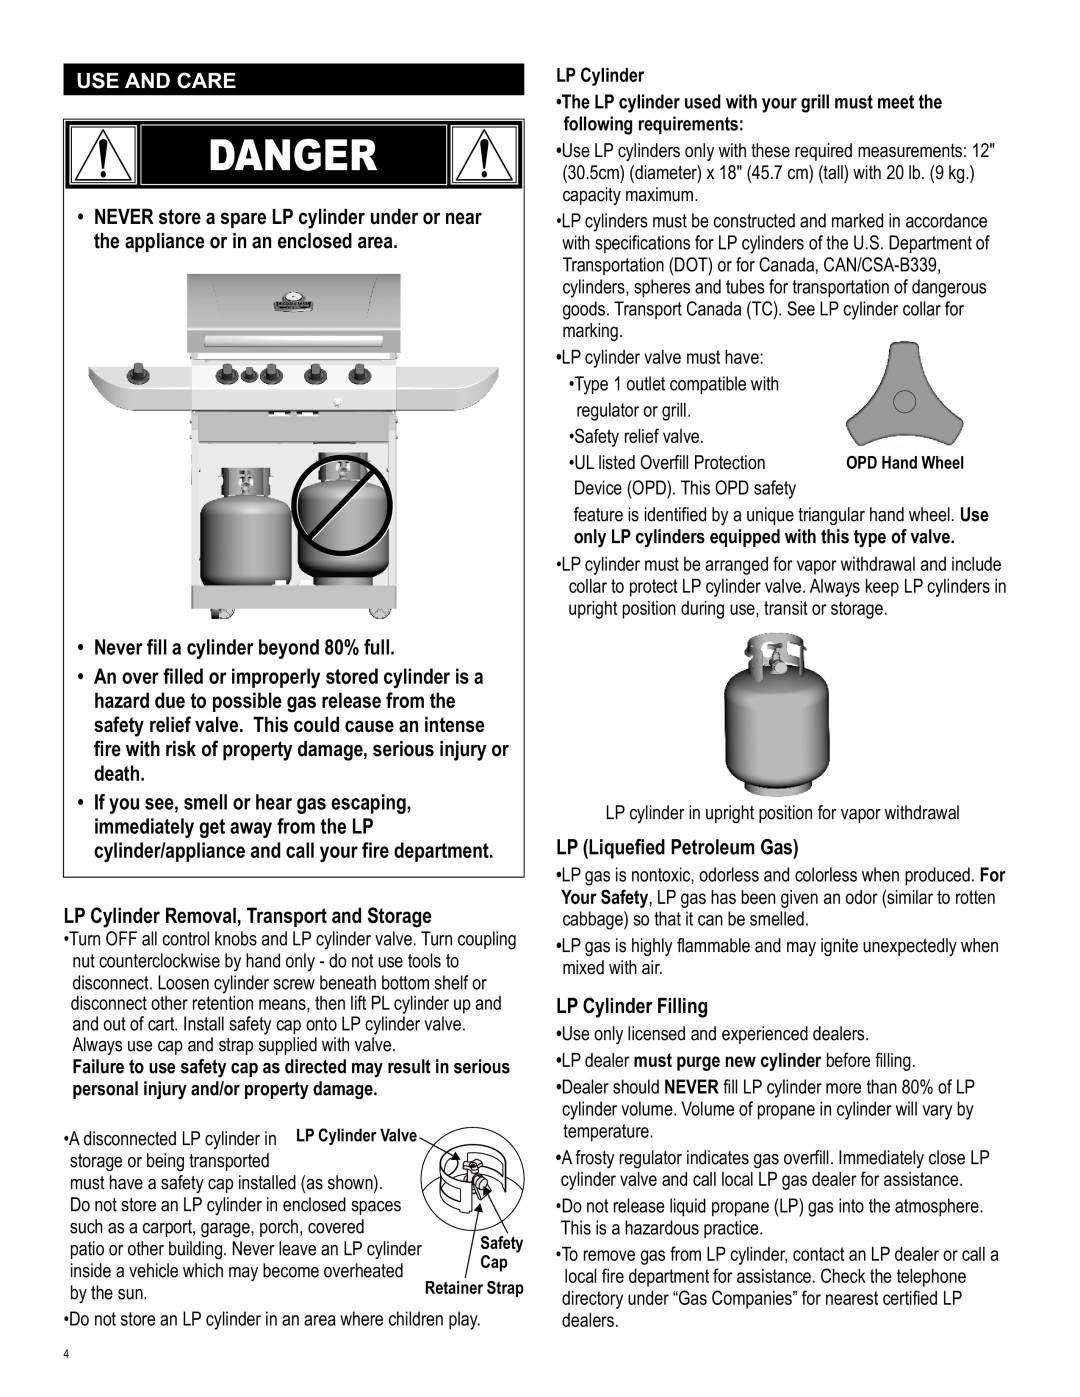 Char-Broil 463243812 manual Danger, Use And Care, LP Cylinder, UL listed Overfill Protection 